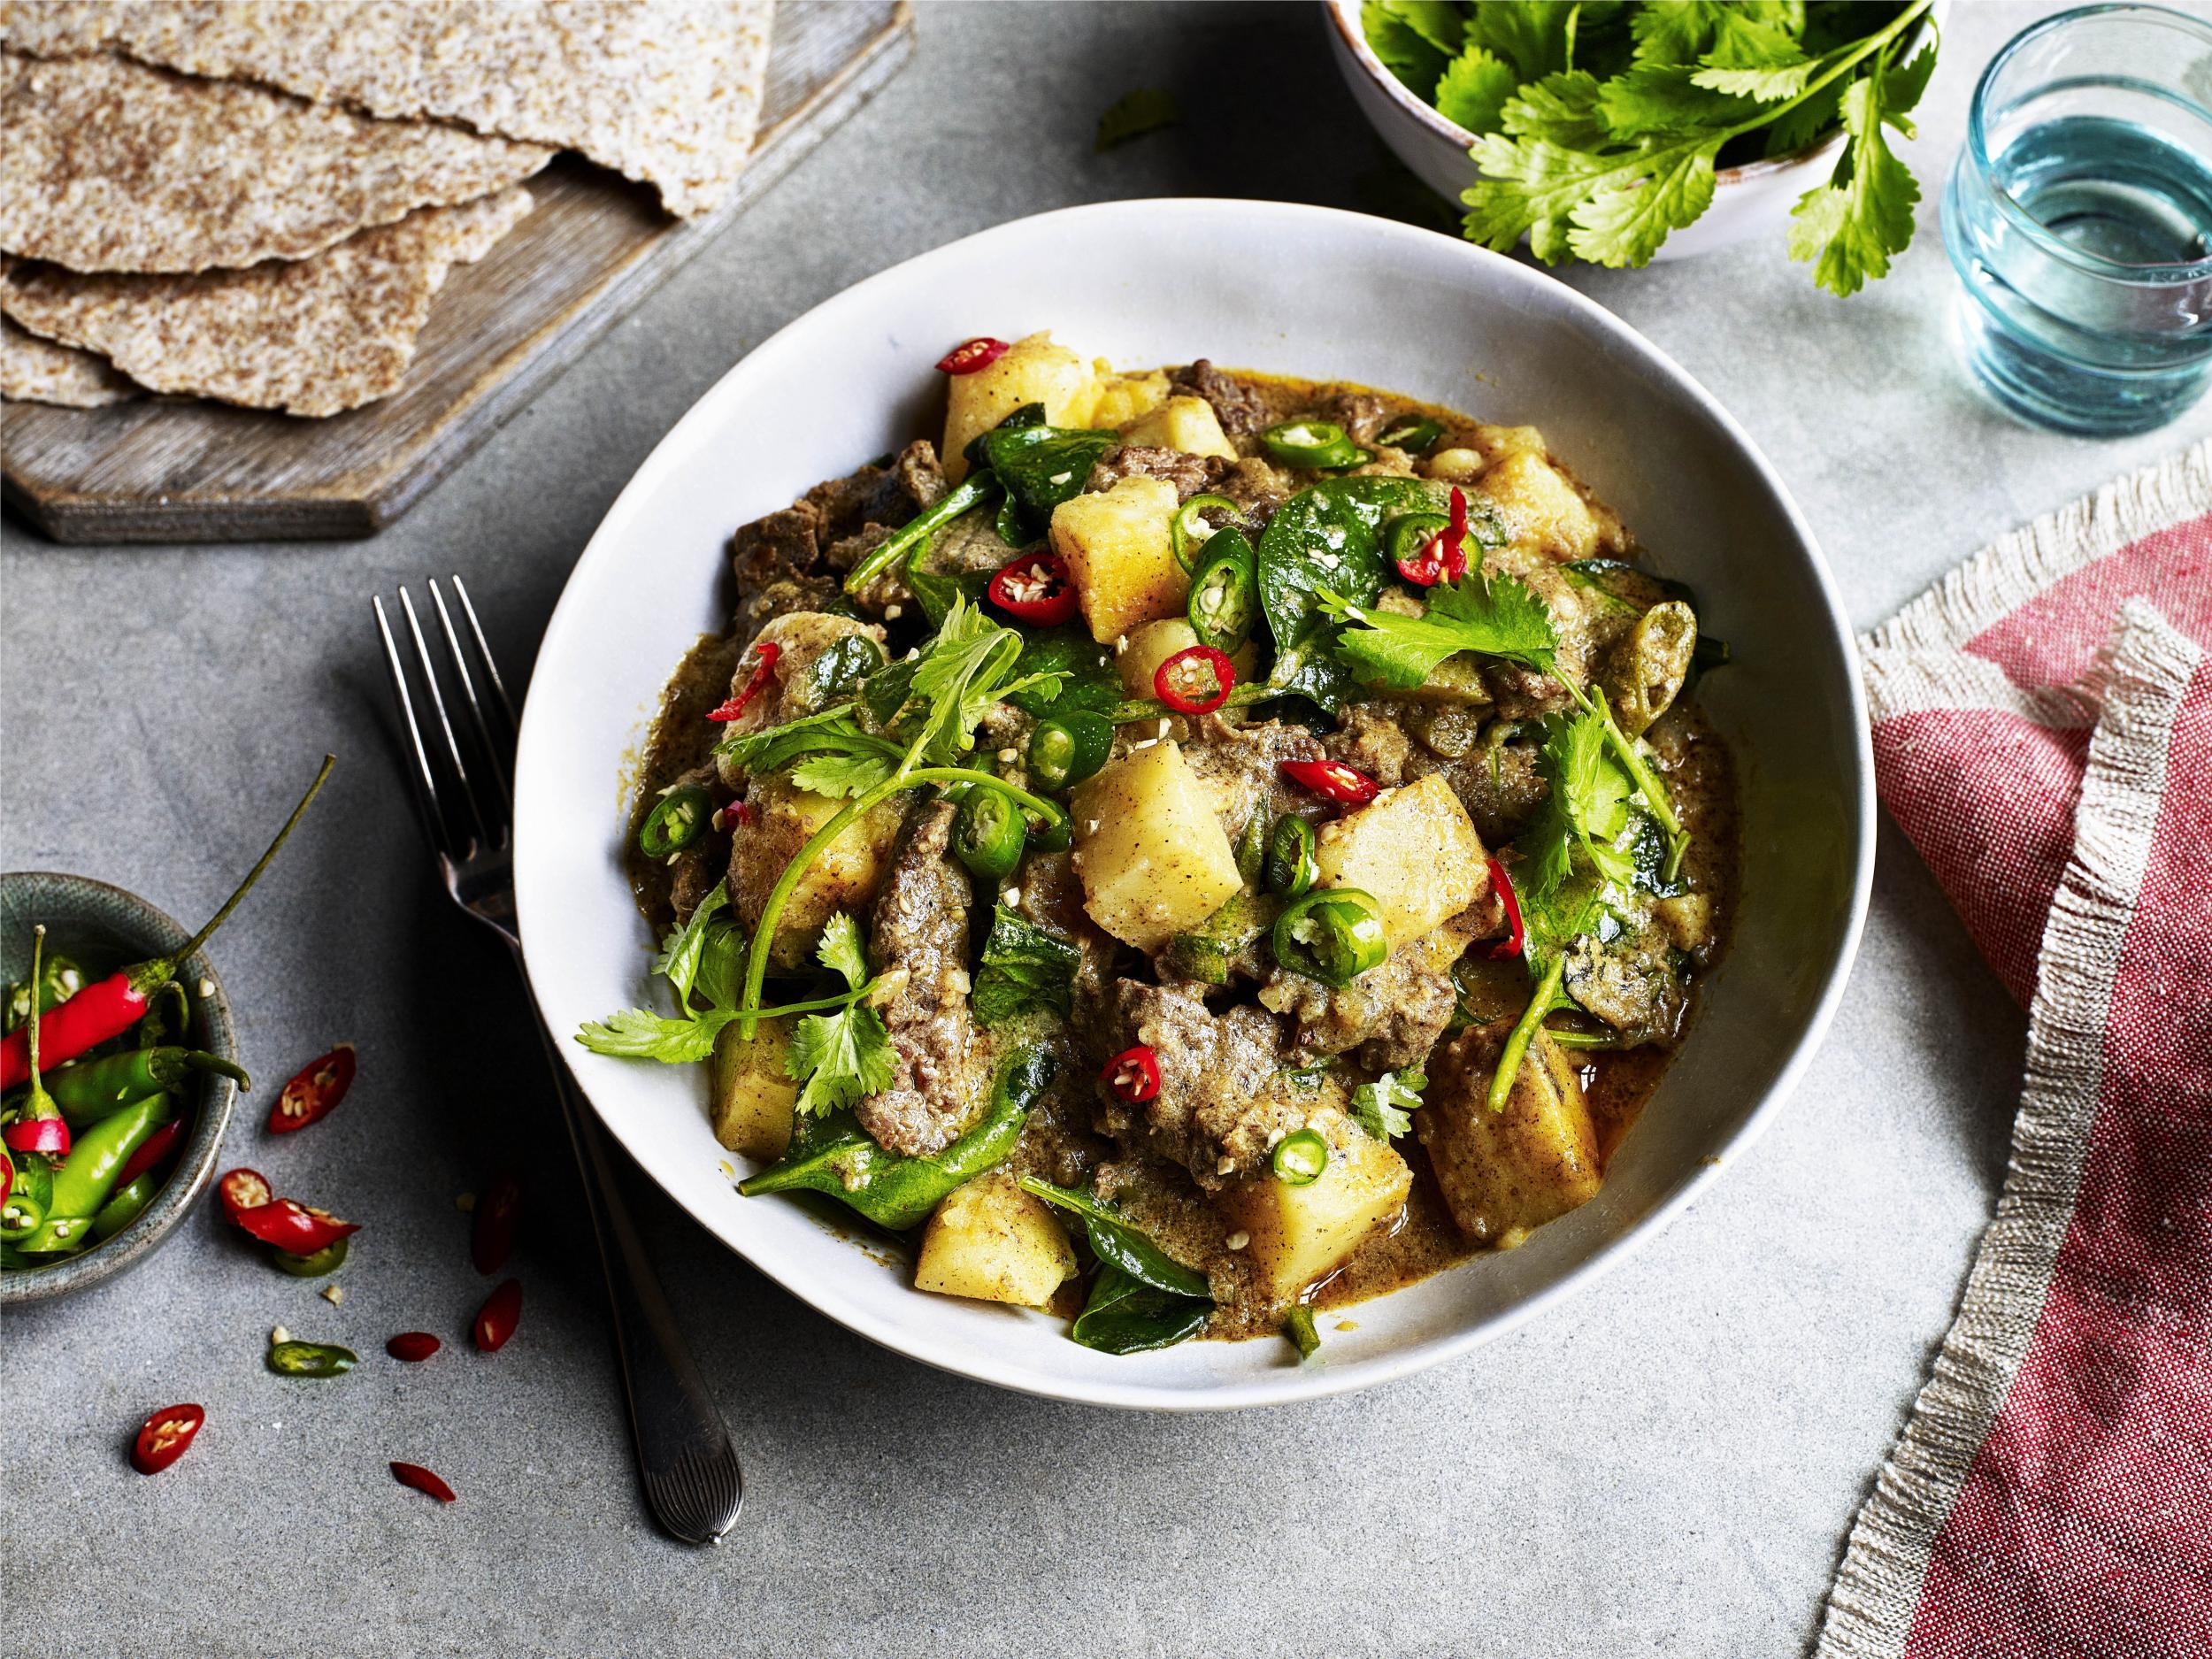 Refreshing to look at and a guilt-free way to satisfy your need for a curry fix